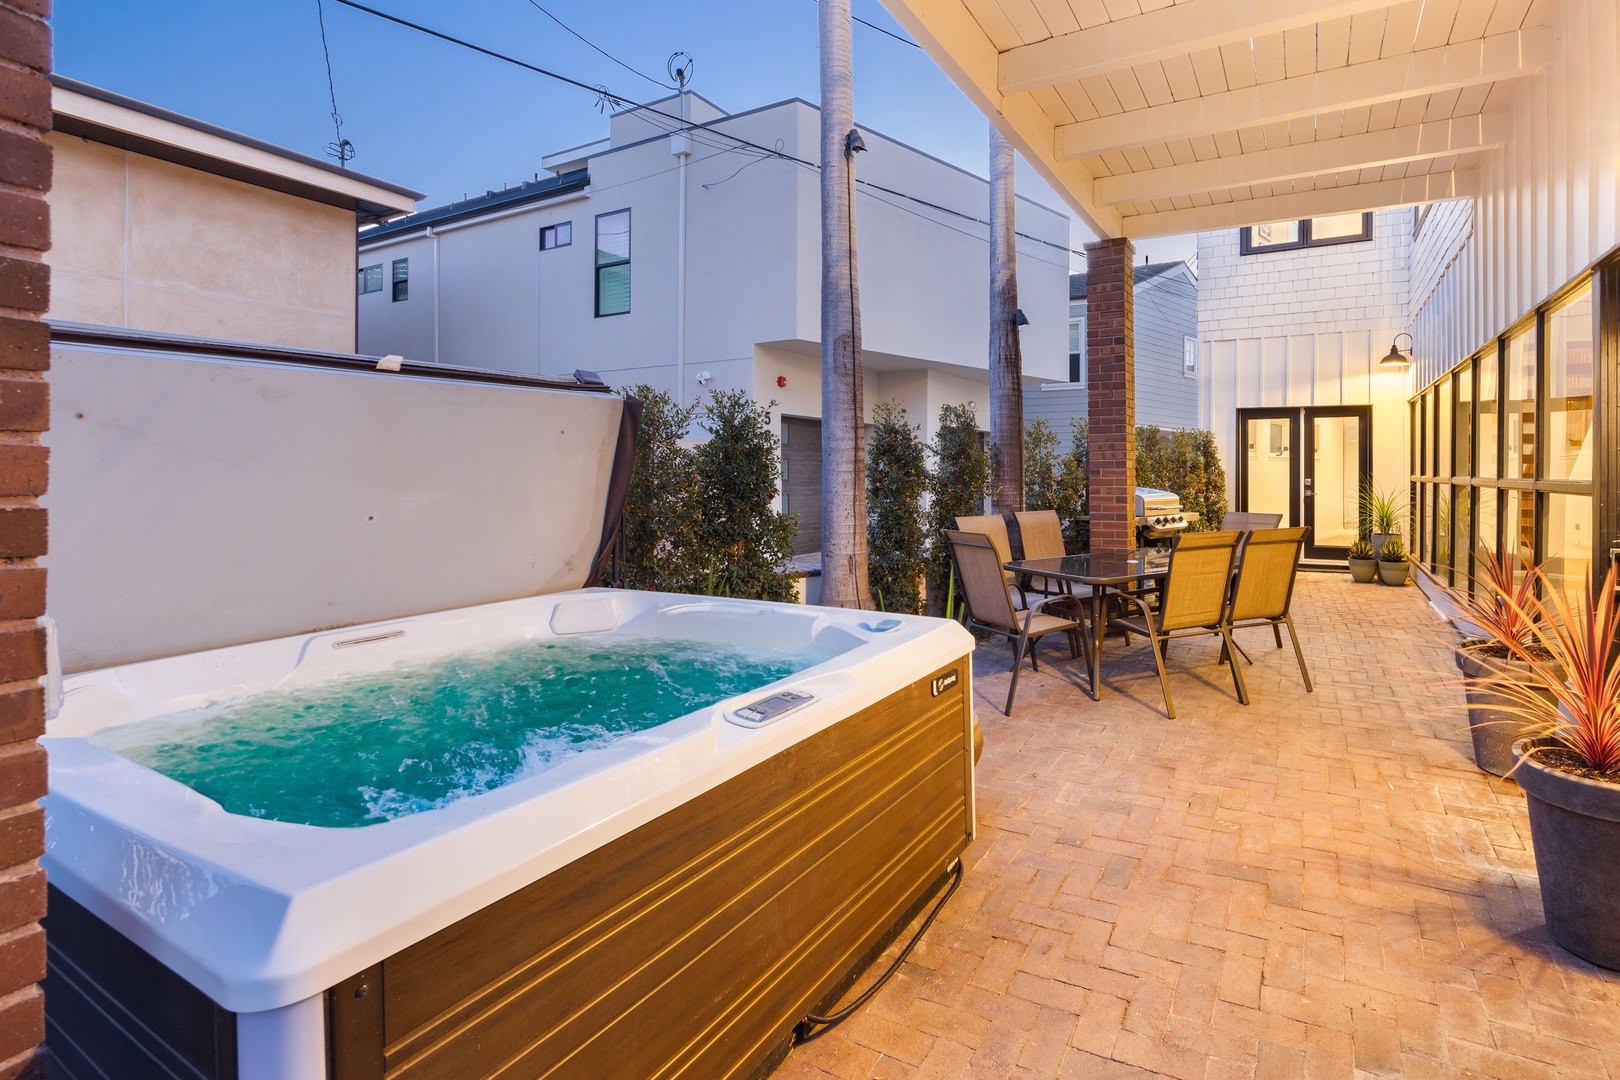 Private hot tub on lower patio